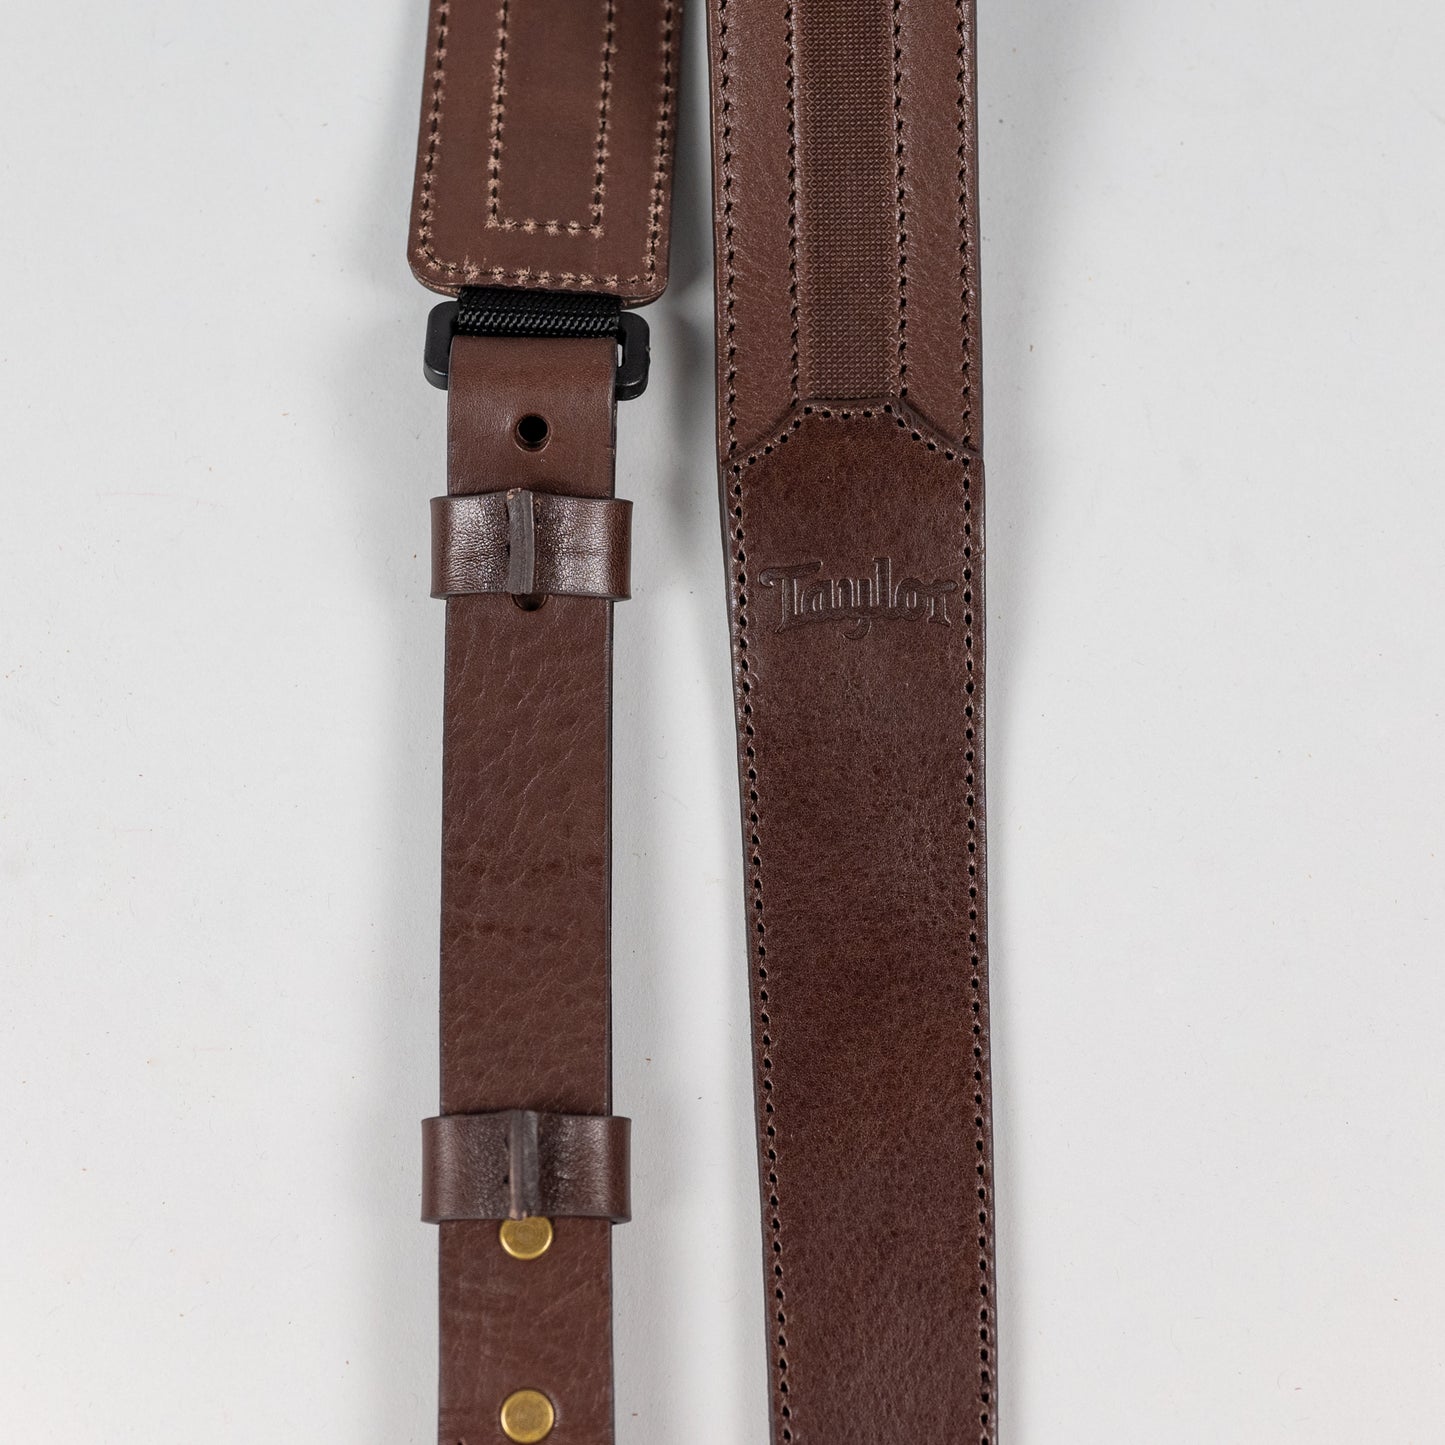 Taylor Slim Leather Guitar Strap, Chocolate Brown